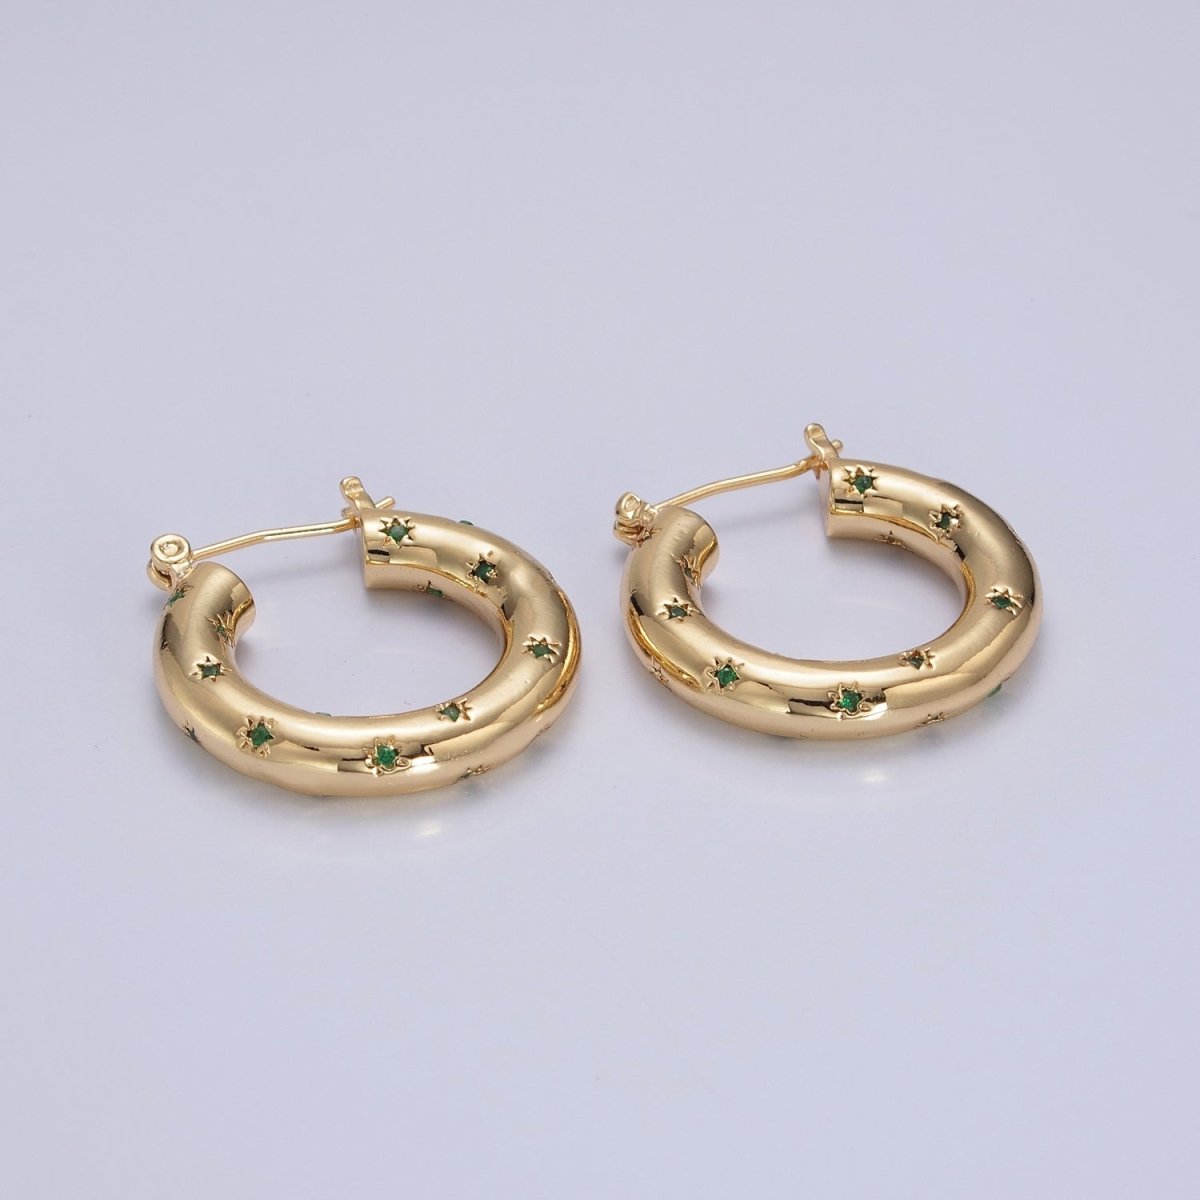 Clear/Green Celestial Star Studded French Lock Hinged Hook Hoop Earrings in Silver & Gold P-383 P-384 P-385 - DLUXCA